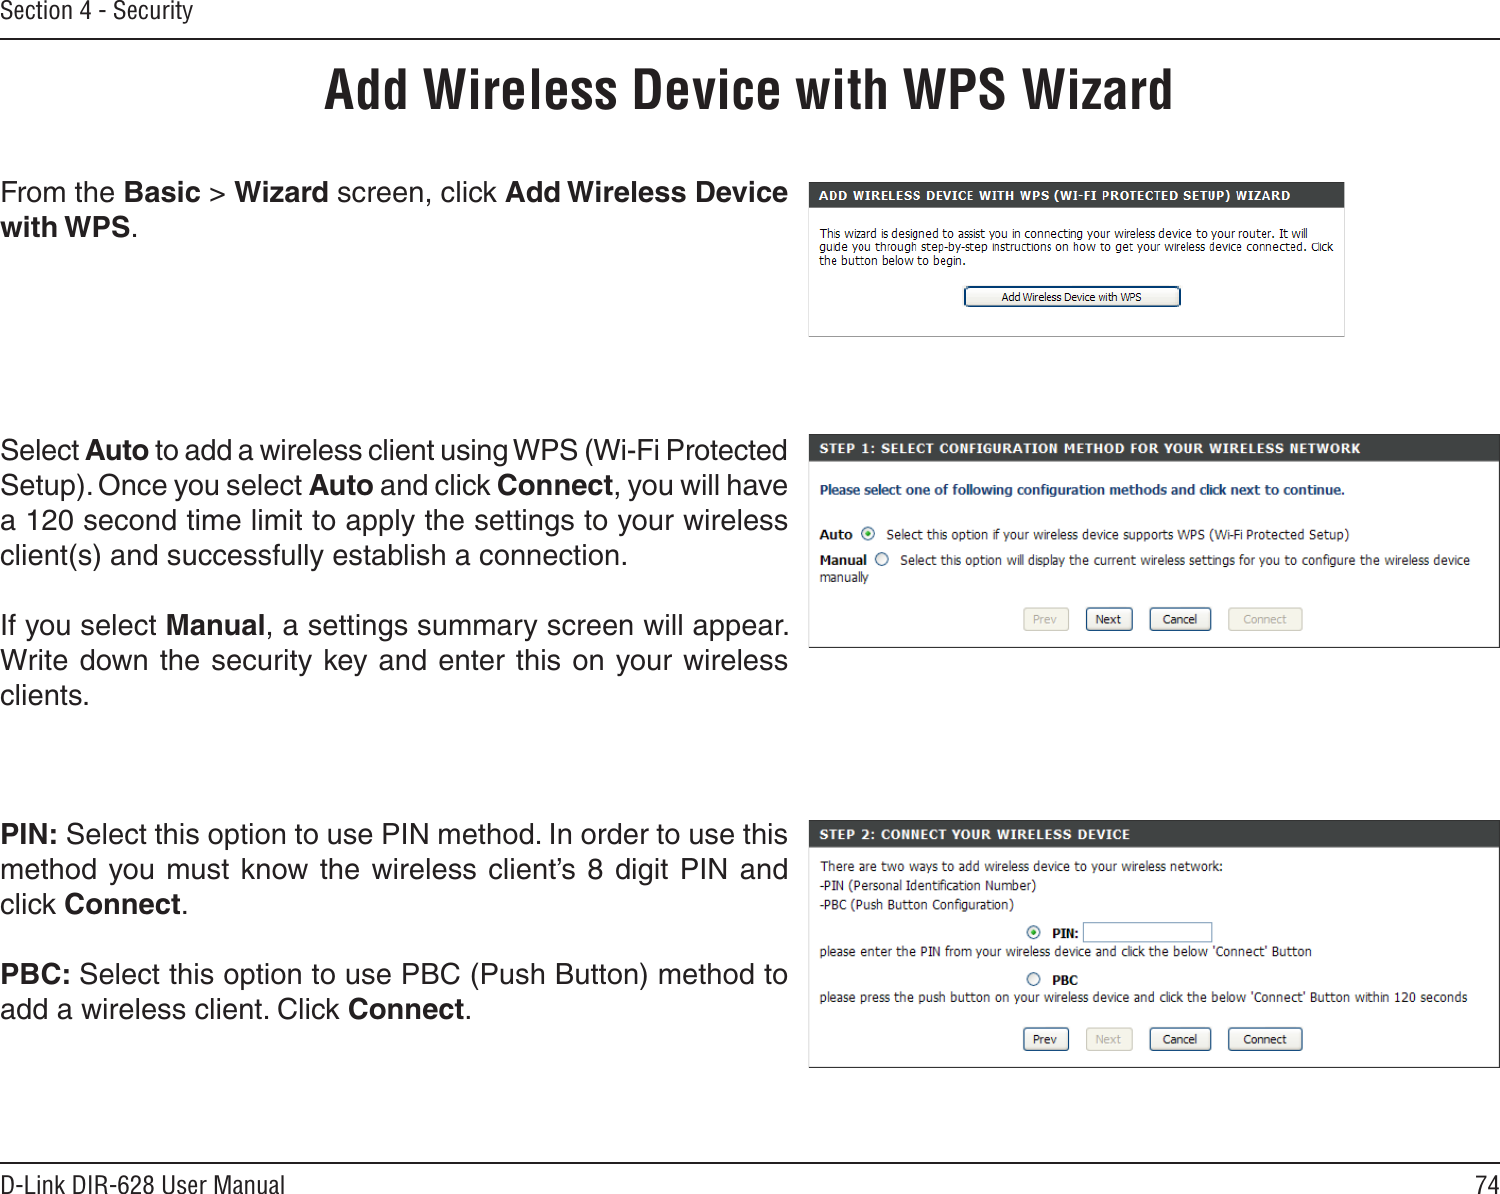 74D-Link DIR-628 User ManualSection 4 - SecurityFrom the Basic &gt; Wizard screen, click Add Wireless Device with WPS.Add Wireless Device with WPS WizardPIN: Select this option to use PIN method. In order to use this method you must know  the wireless client’s 8  digit PIN and click Connect.PBC: Select this option to use PBC (Push Button) method to add a wireless client. Click Connect.Select Auto to add a wireless client using WPS (Wi-Fi Protected Setup). Once you select Auto and click Connect, you will have a 120 second time limit to apply the settings to your wireless client(s) and successfully establish a connection. If you select Manual, a settings summary screen will appear. Write down the security key and enter this on your wireless clients. 